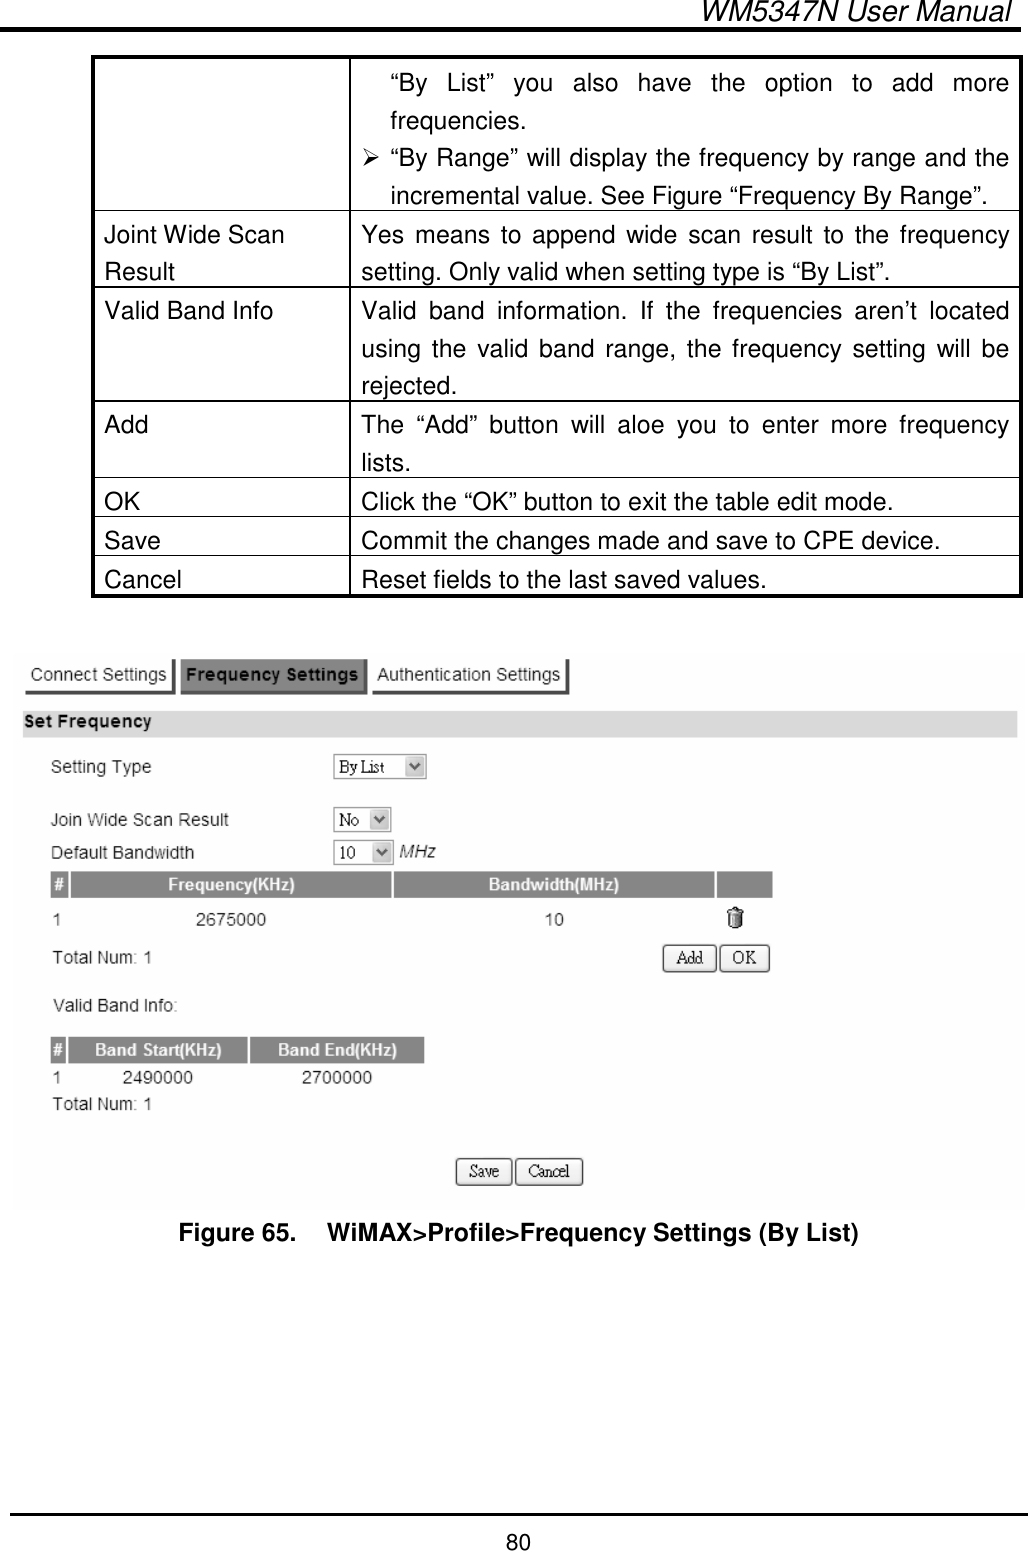  WM5347N User Manual  80 “By  List”  you  also  have  the  option  to  add  more frequencies.  “By Range” will display the frequency by range and the incremental value. See Figure “Frequency By Range”. Joint Wide Scan Result Yes means to append wide scan result to  the frequency setting. Only valid when setting type is “By List”. Valid Band Info  Valid  band  information.  If  the  frequencies  aren’t  located using the valid band range, the frequency setting  will be rejected. Add  The  “Add”  button  will  aloe  you  to  enter  more  frequency lists. OK  Click the “OK” button to exit the table edit mode. Save  Commit the changes made and save to CPE device. Cancel  Reset fields to the last saved values.   Figure 65.   WiMAX&gt;Profile&gt;Frequency Settings (By List)  